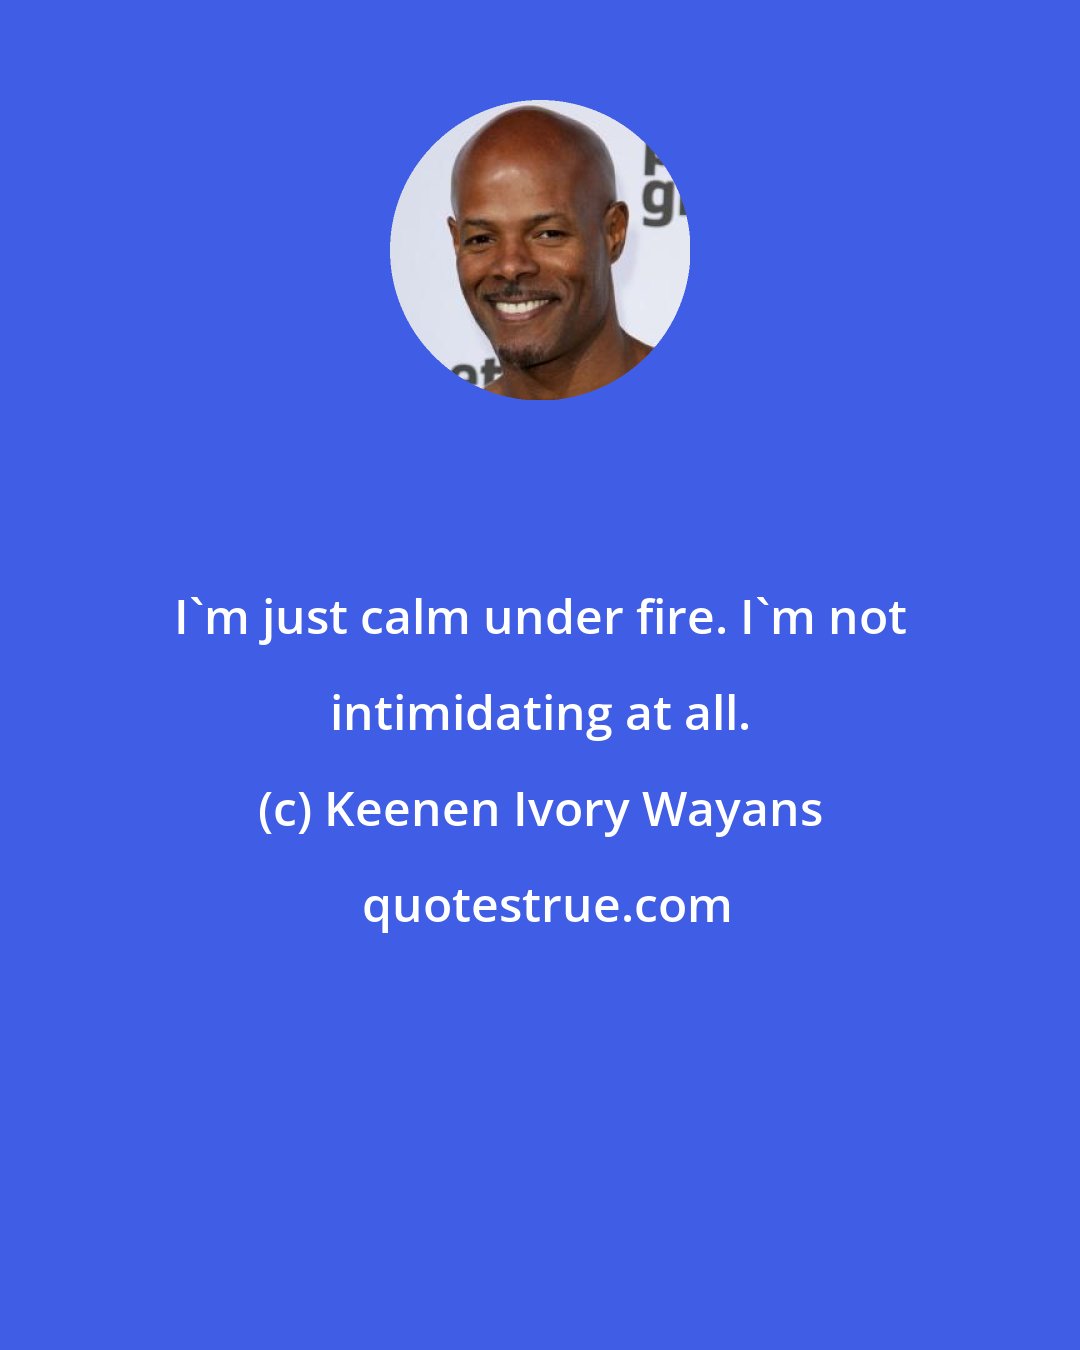 Keenen Ivory Wayans: I'm just calm under fire. I'm not intimidating at all.